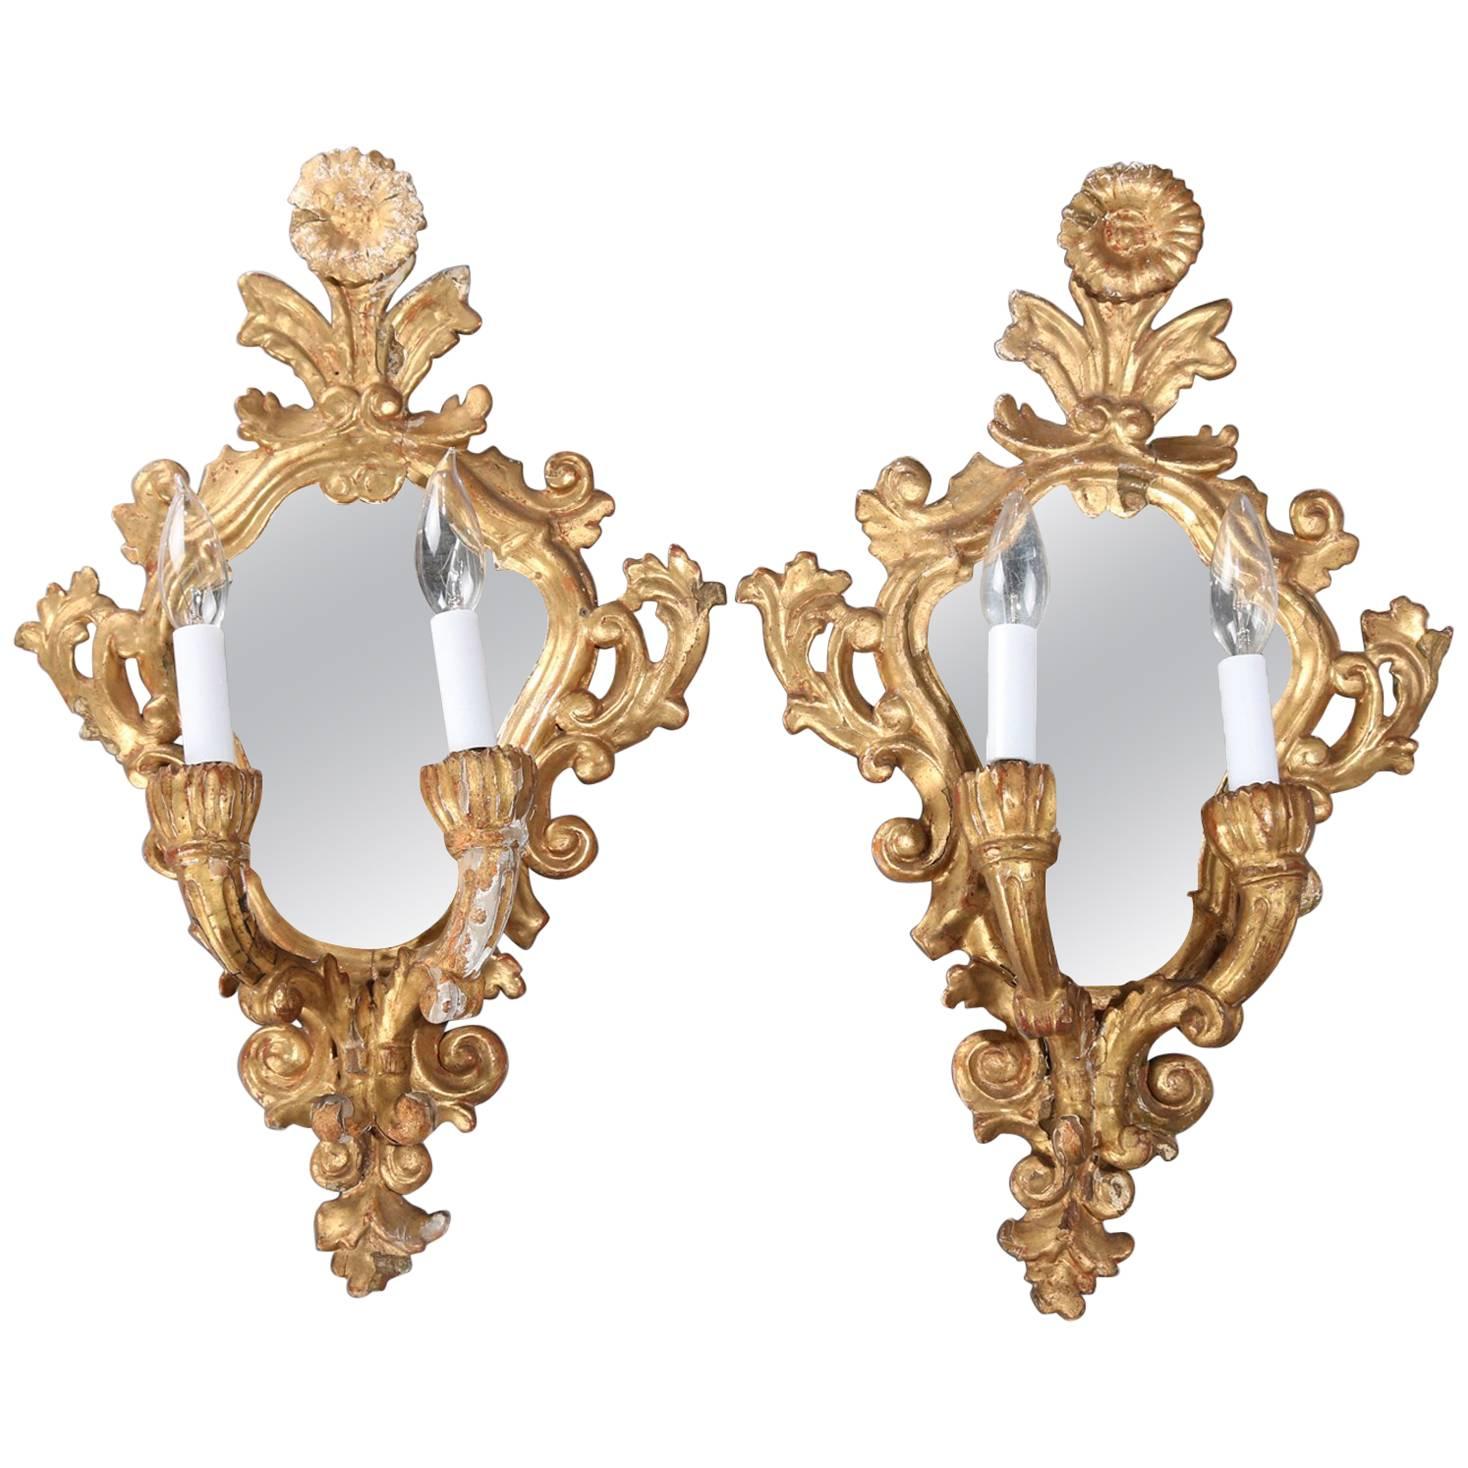 French Rococo Foliate Carved Giltwood Mirrored Candle Sconces, Electric